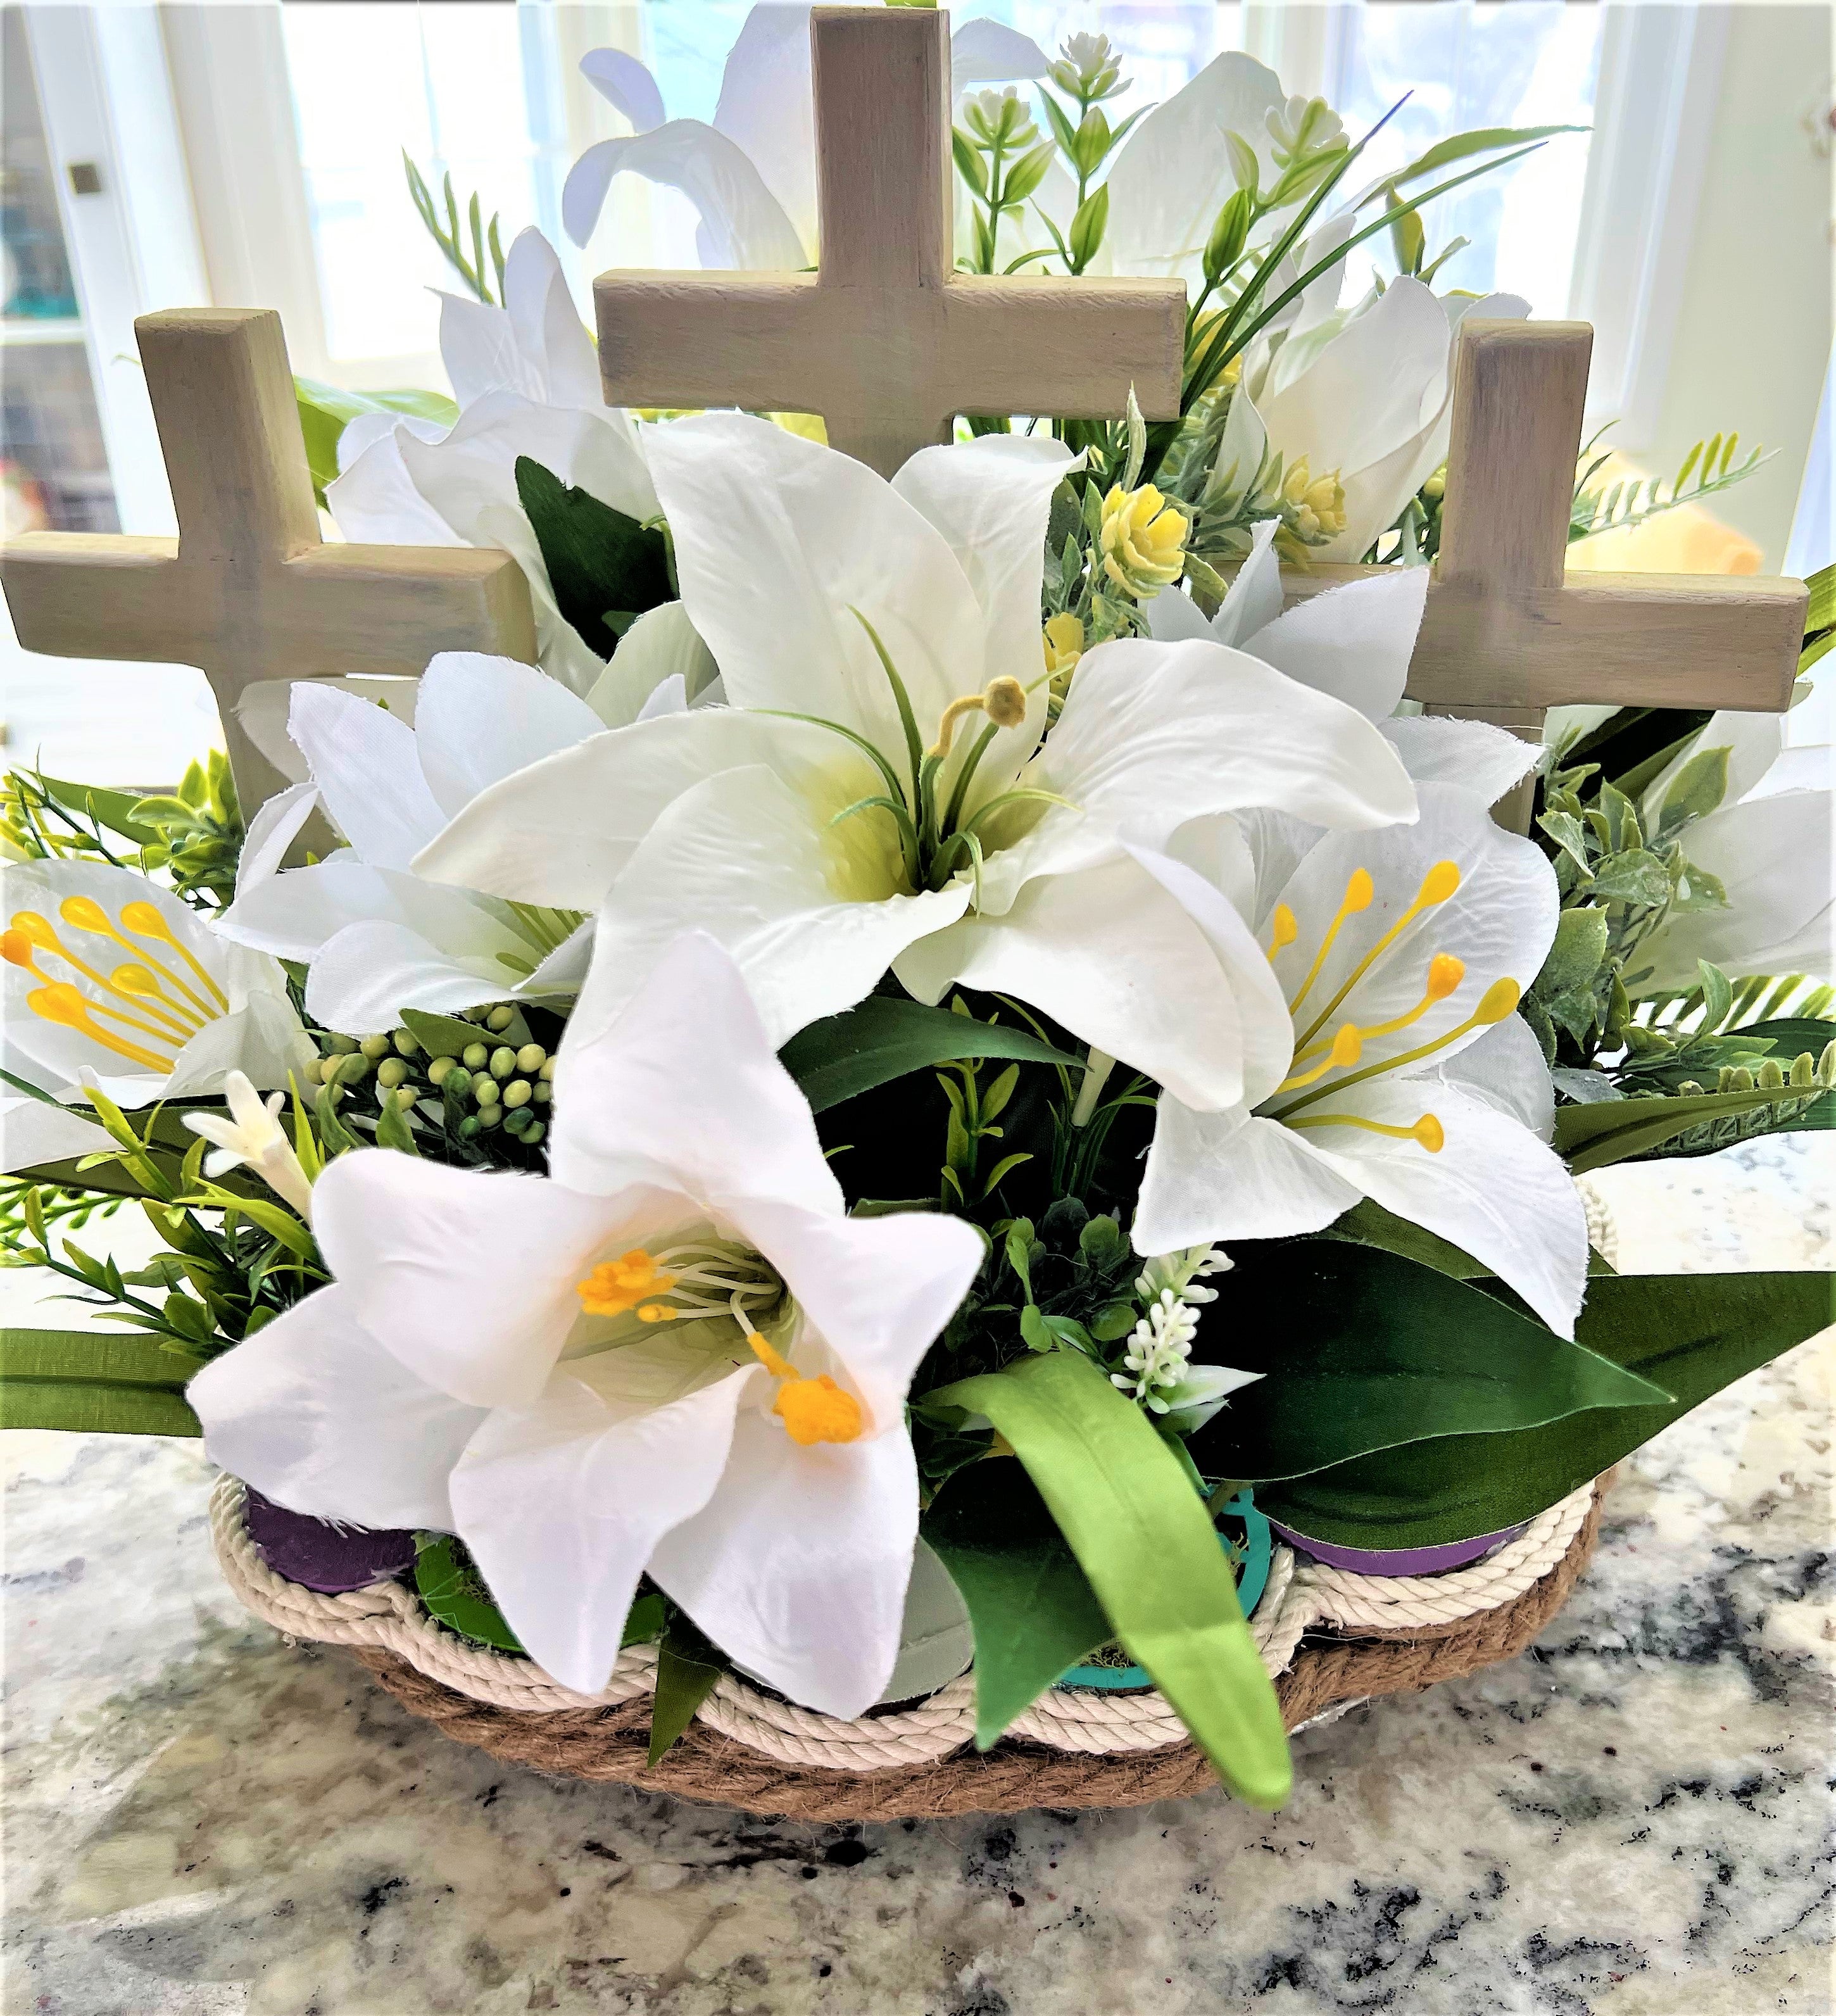 Easter Cross Centerpiece- Lily table Centerpiece  12"W x 18"L